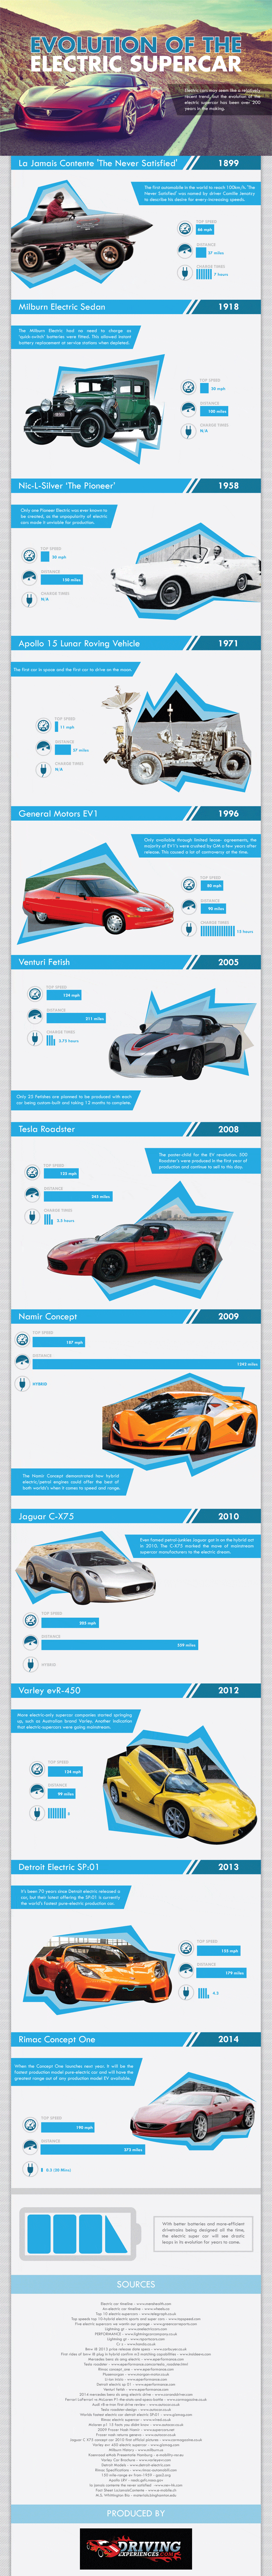 History of Electric Supercars